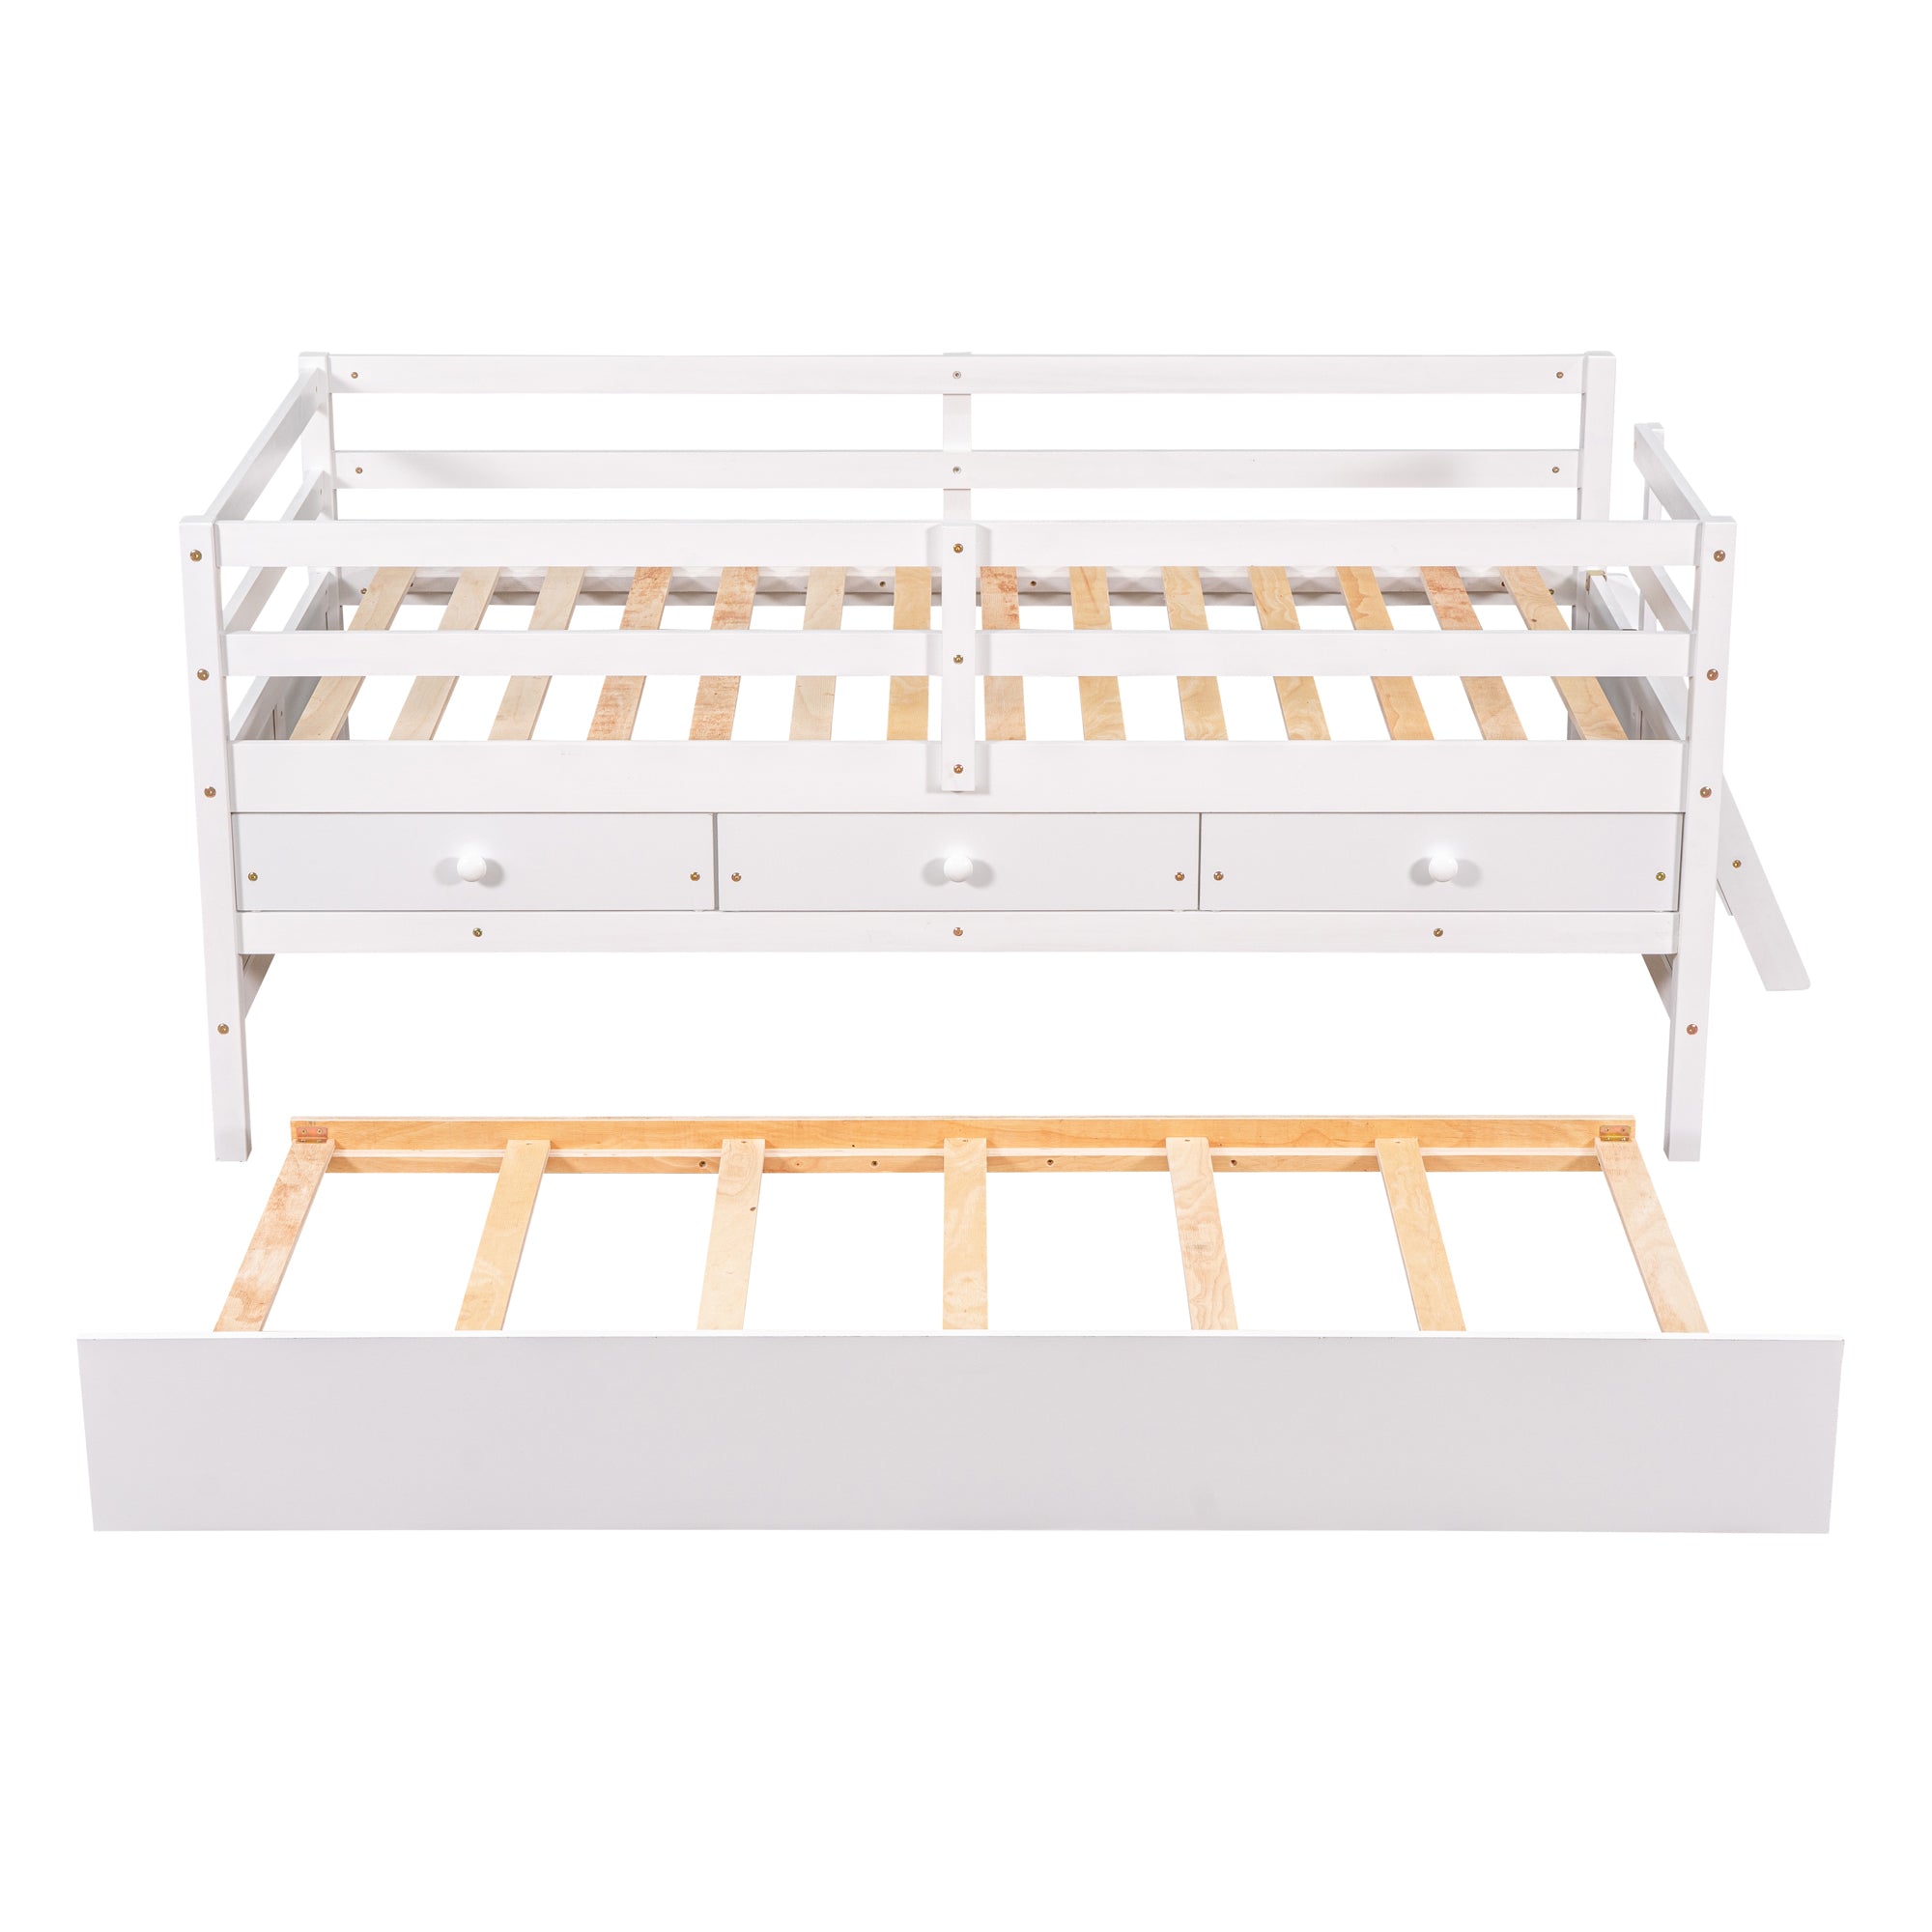 Bellemave Low Loft Bed with Full Safety Fence, Climbing ladder, Storage Drawers and Trundle